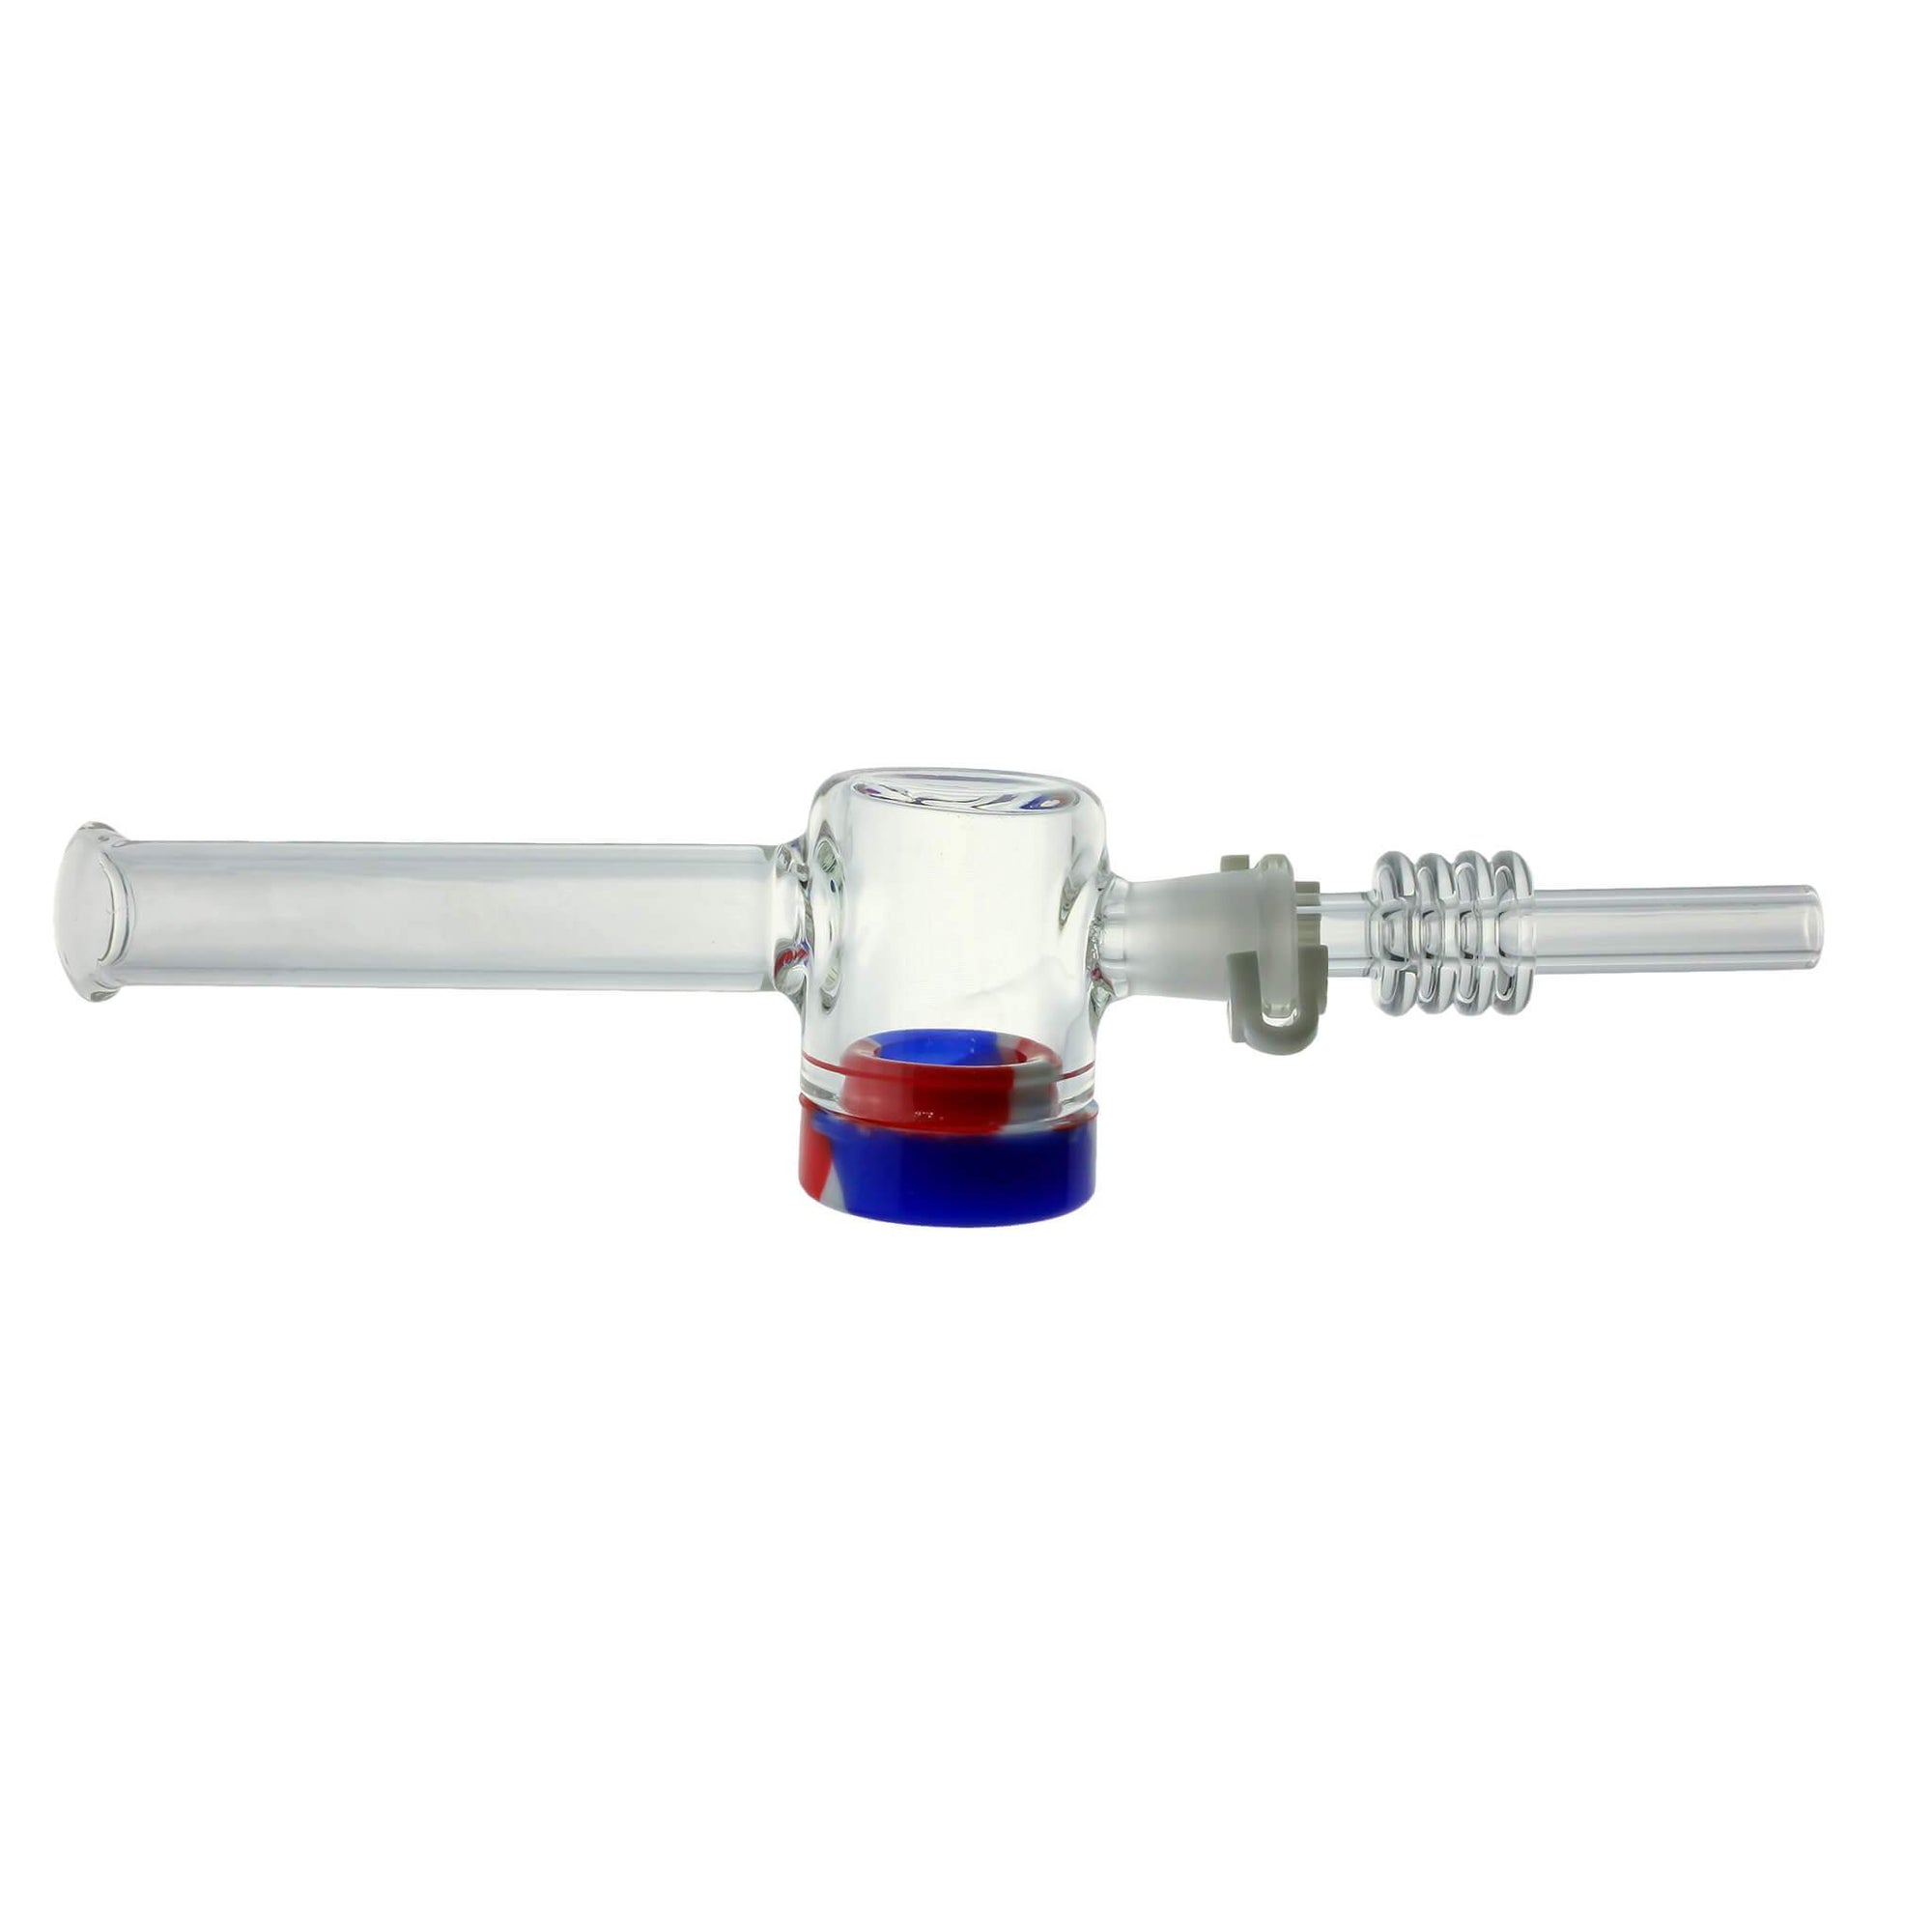 Glass Nectar Collector Kits | Angled Business View | Dabbing Warehouse